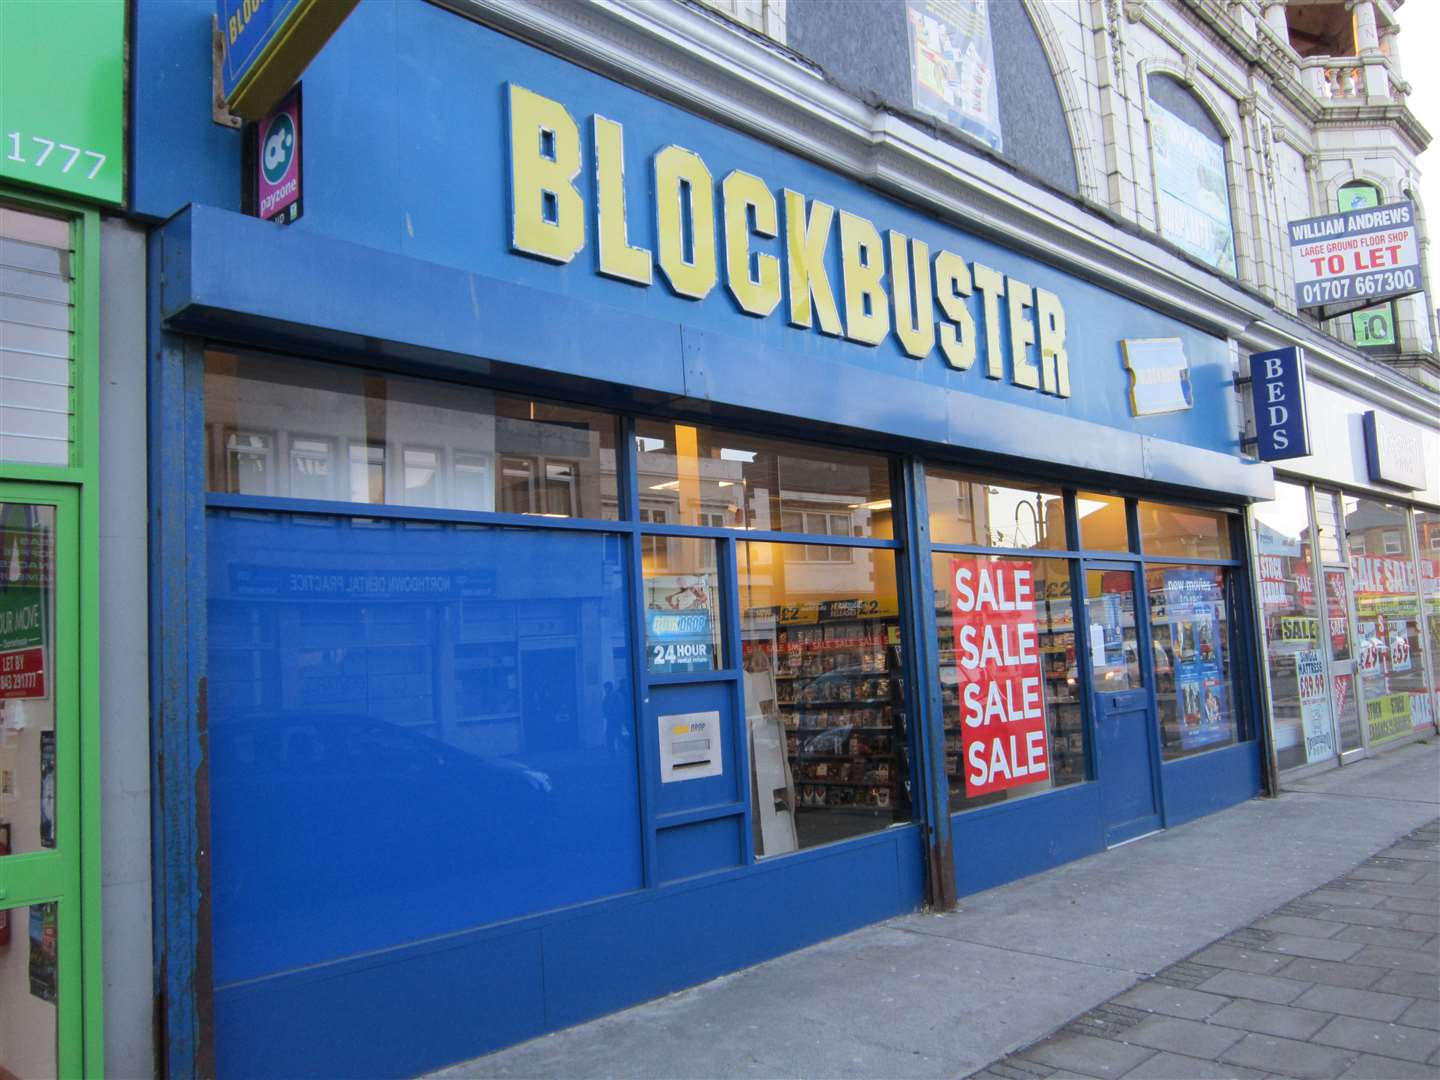 The Margate Blockbuster photographed in 2013